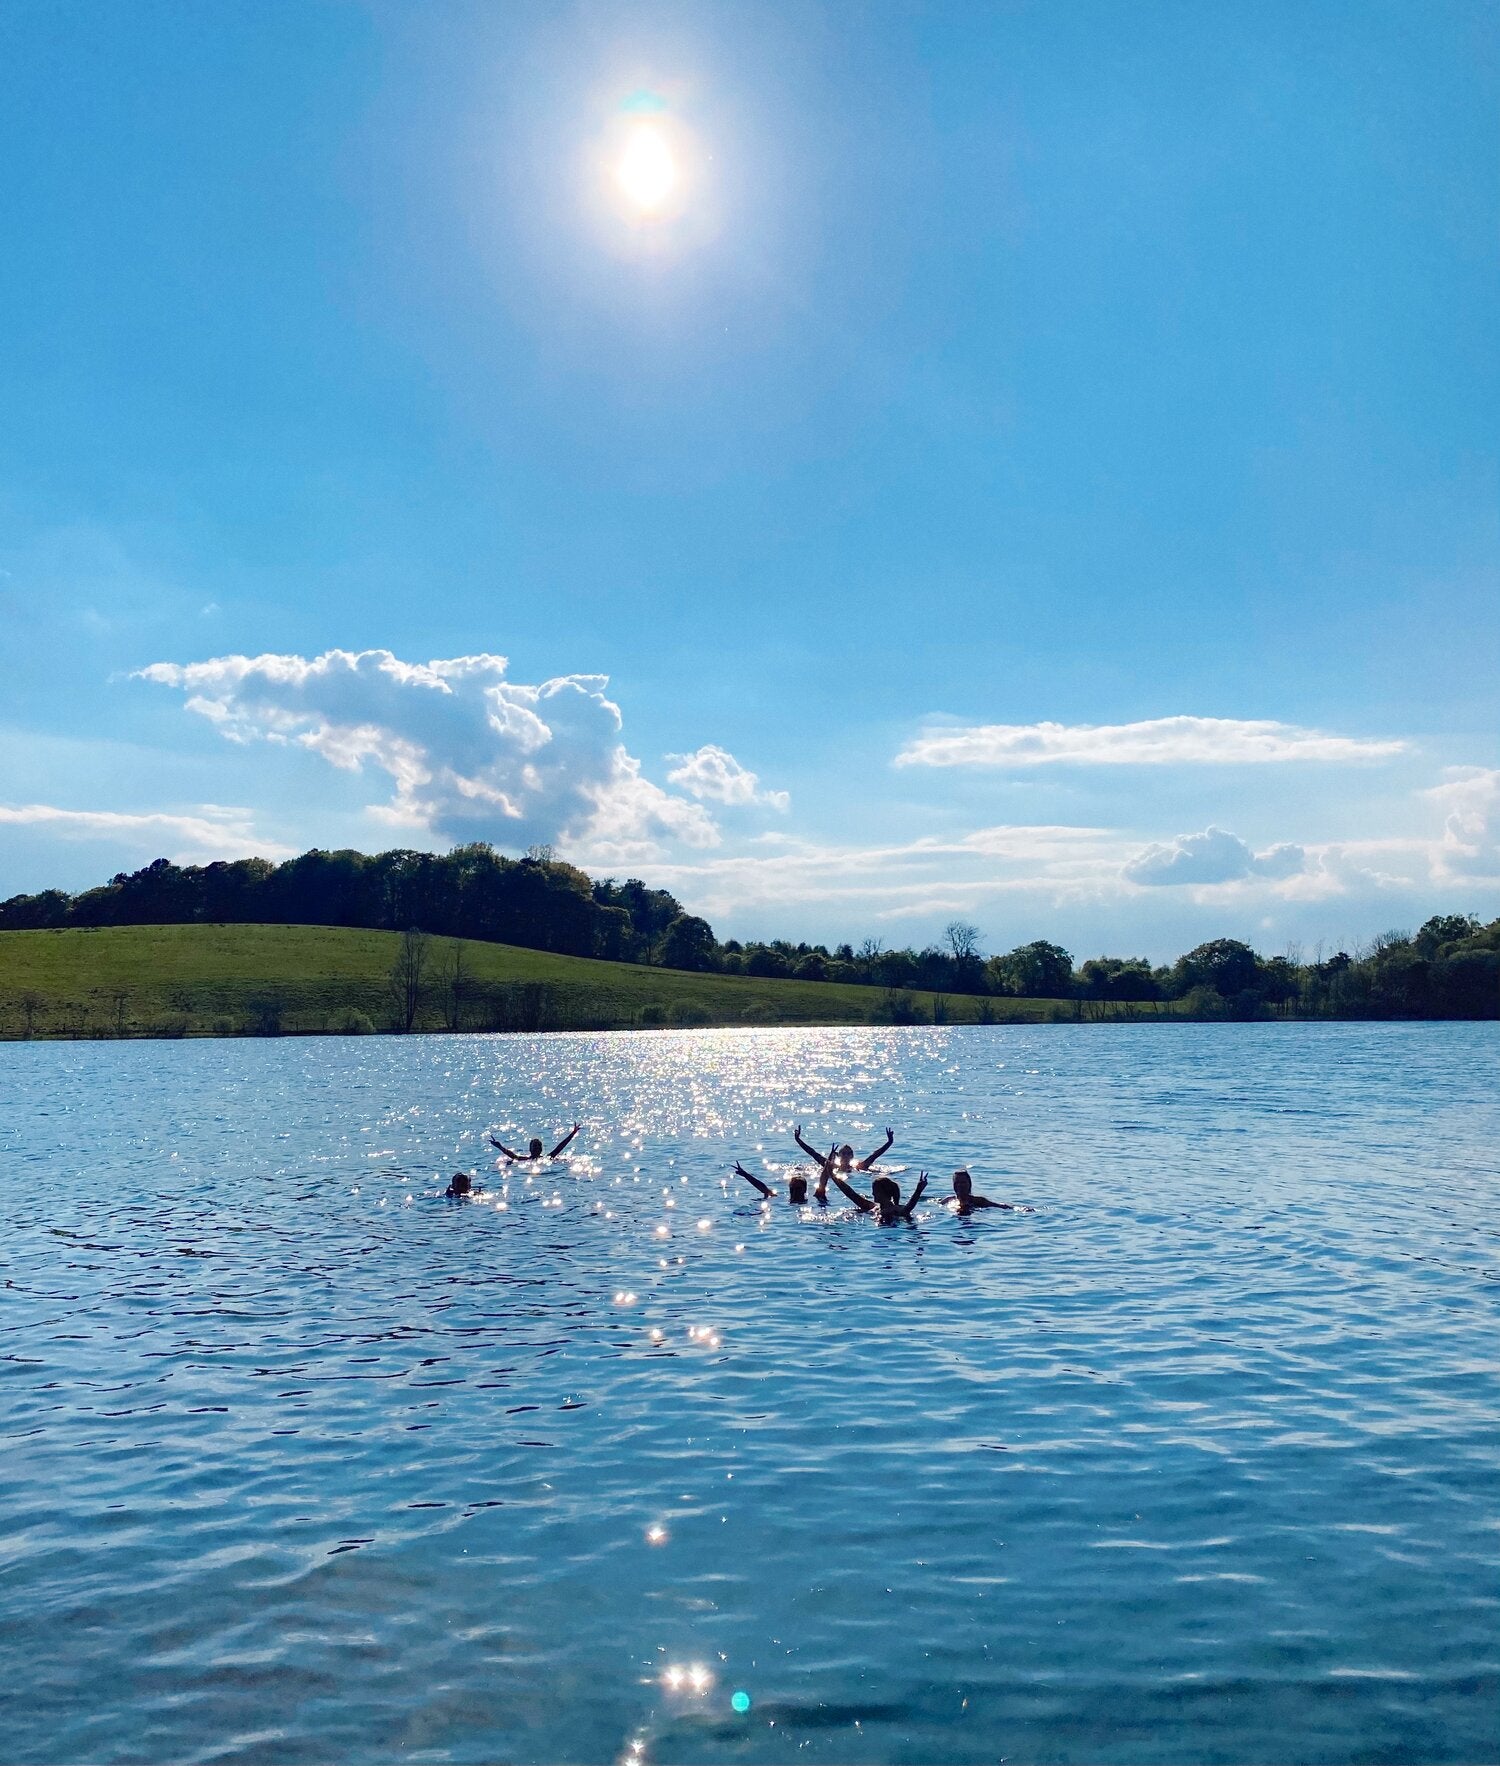 The joy of wild swimming: What’s causing so many people to take the plunge?